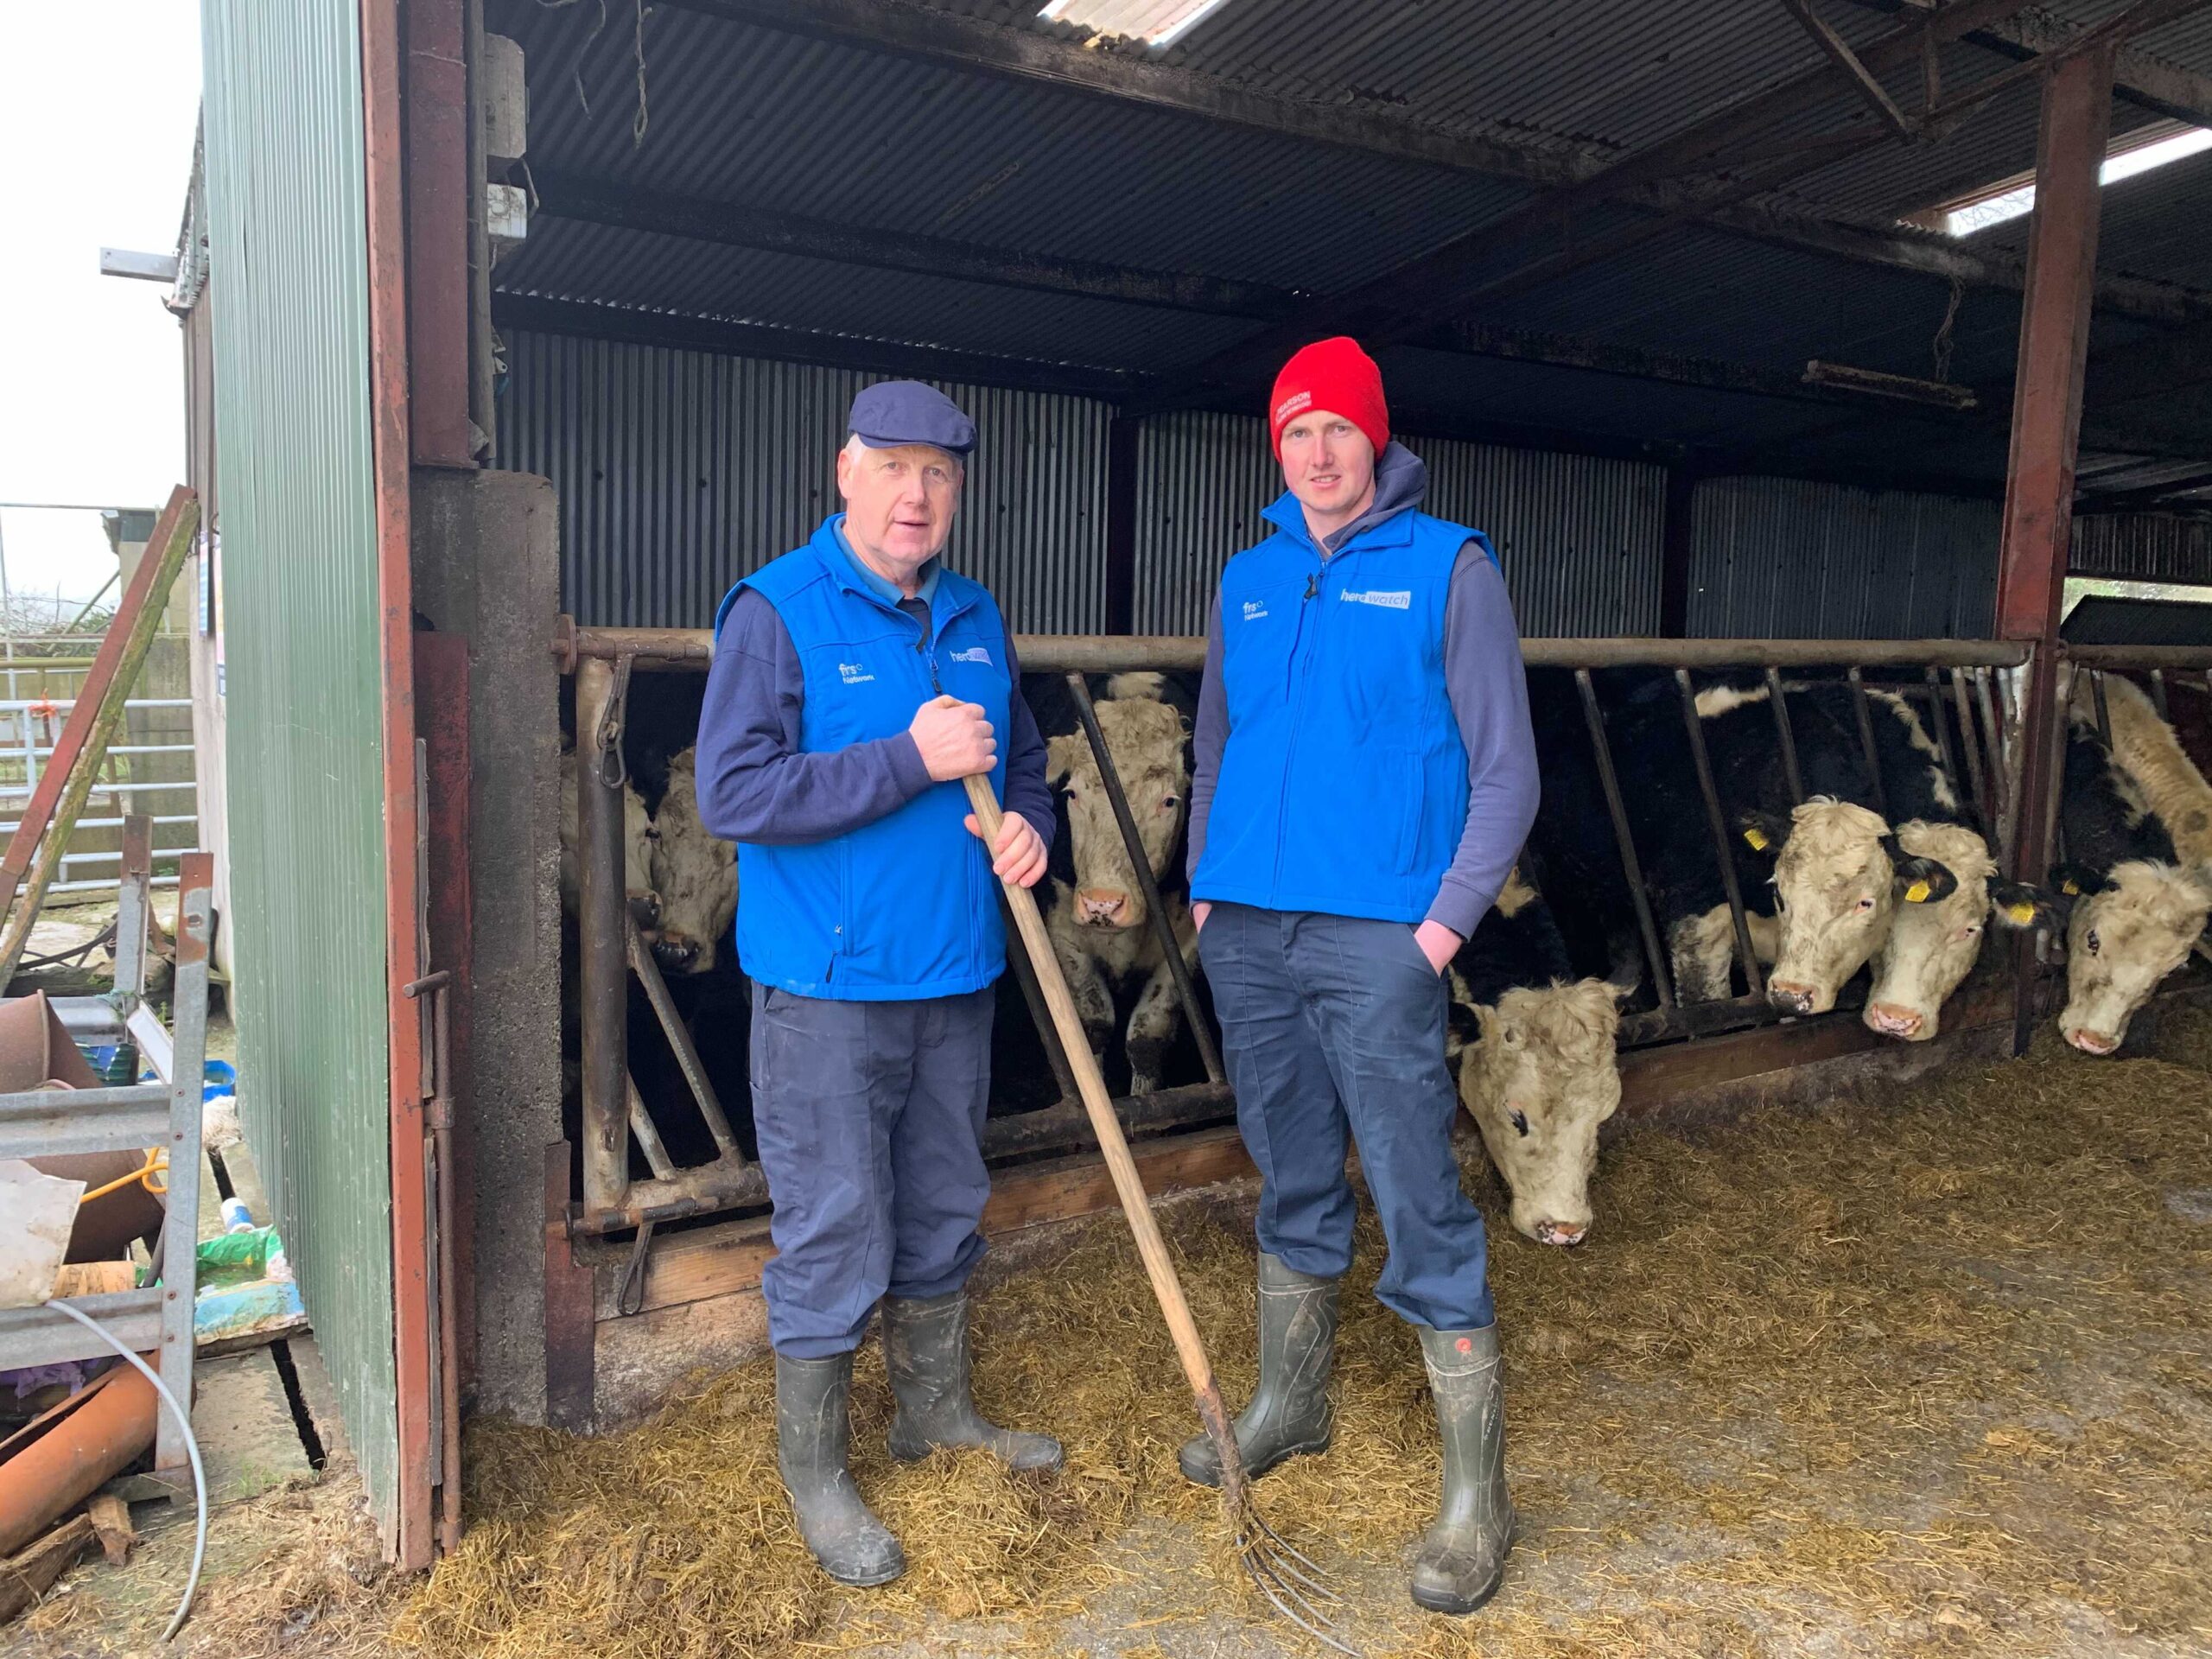 Herdwatch farmers in shed cattle